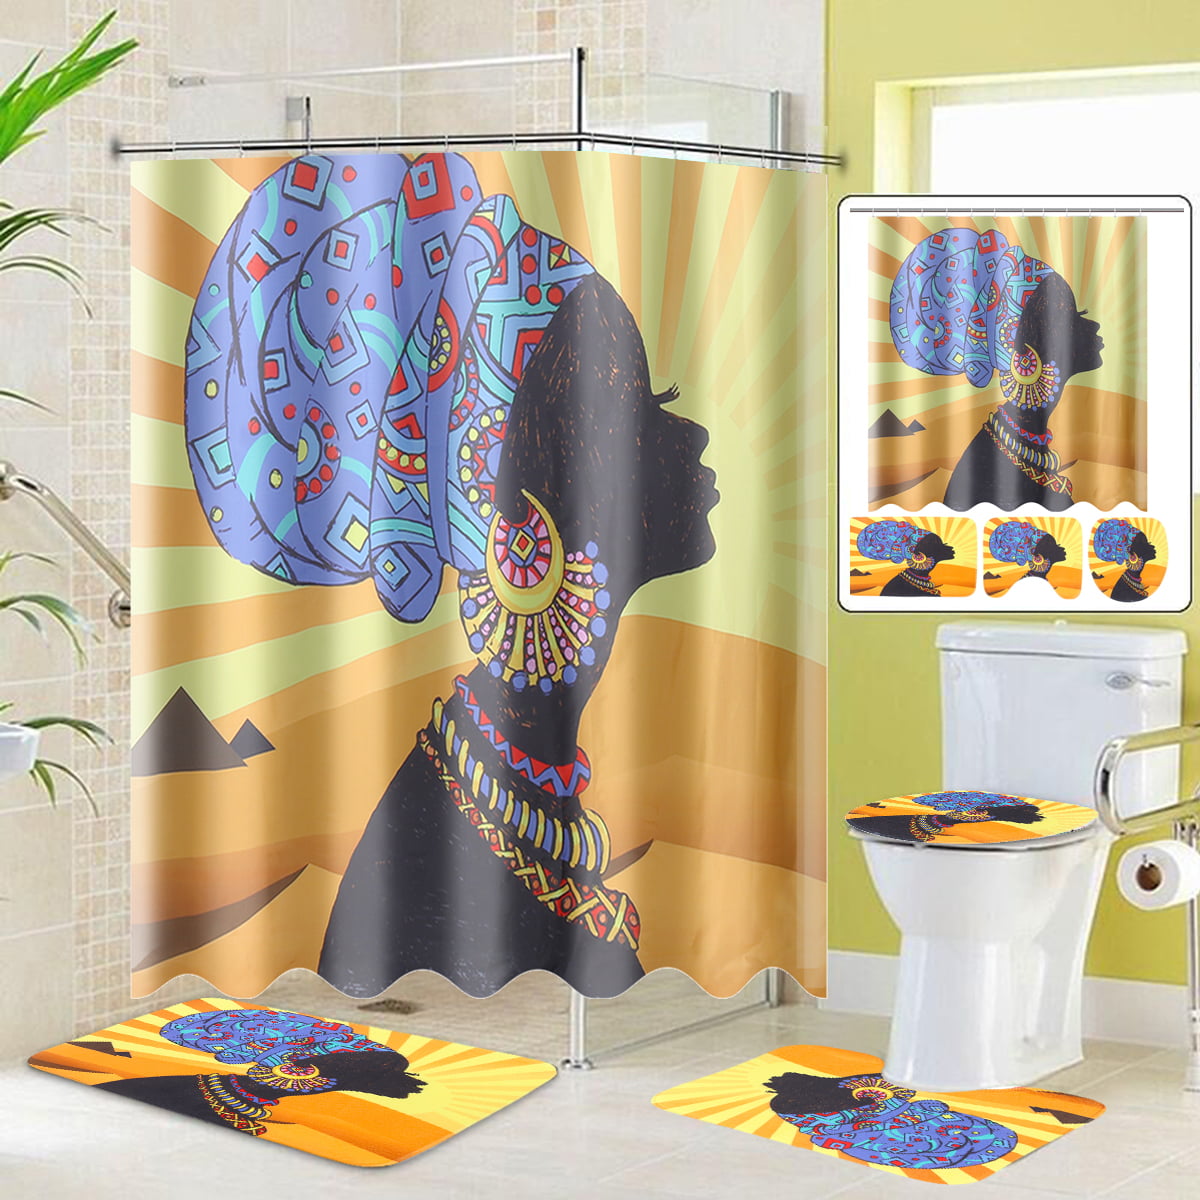 Shower Curtain African Woman and Lions Printing Decor Bath Curtains 12 Hooks 